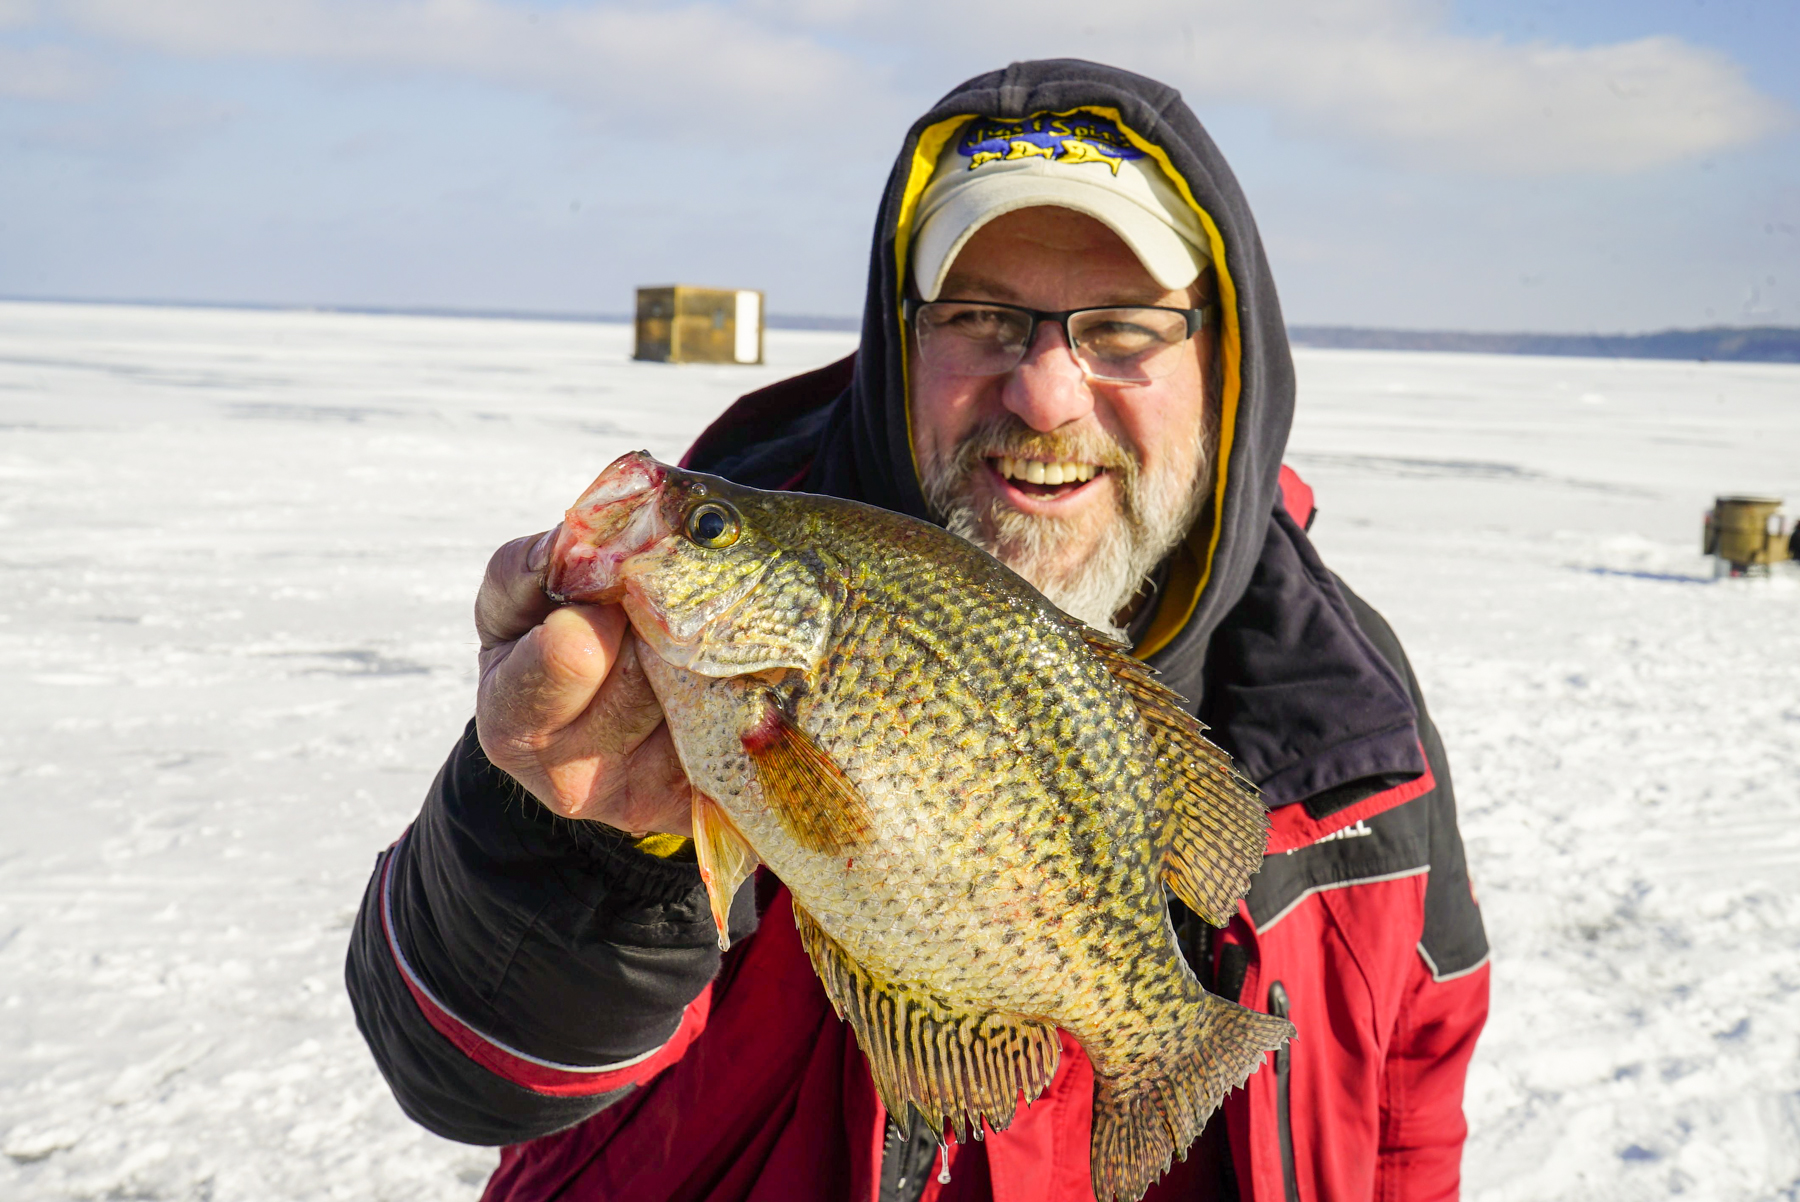 Beginner Ice Fishing Tips - Walleye, Perch, Crappie, Trout